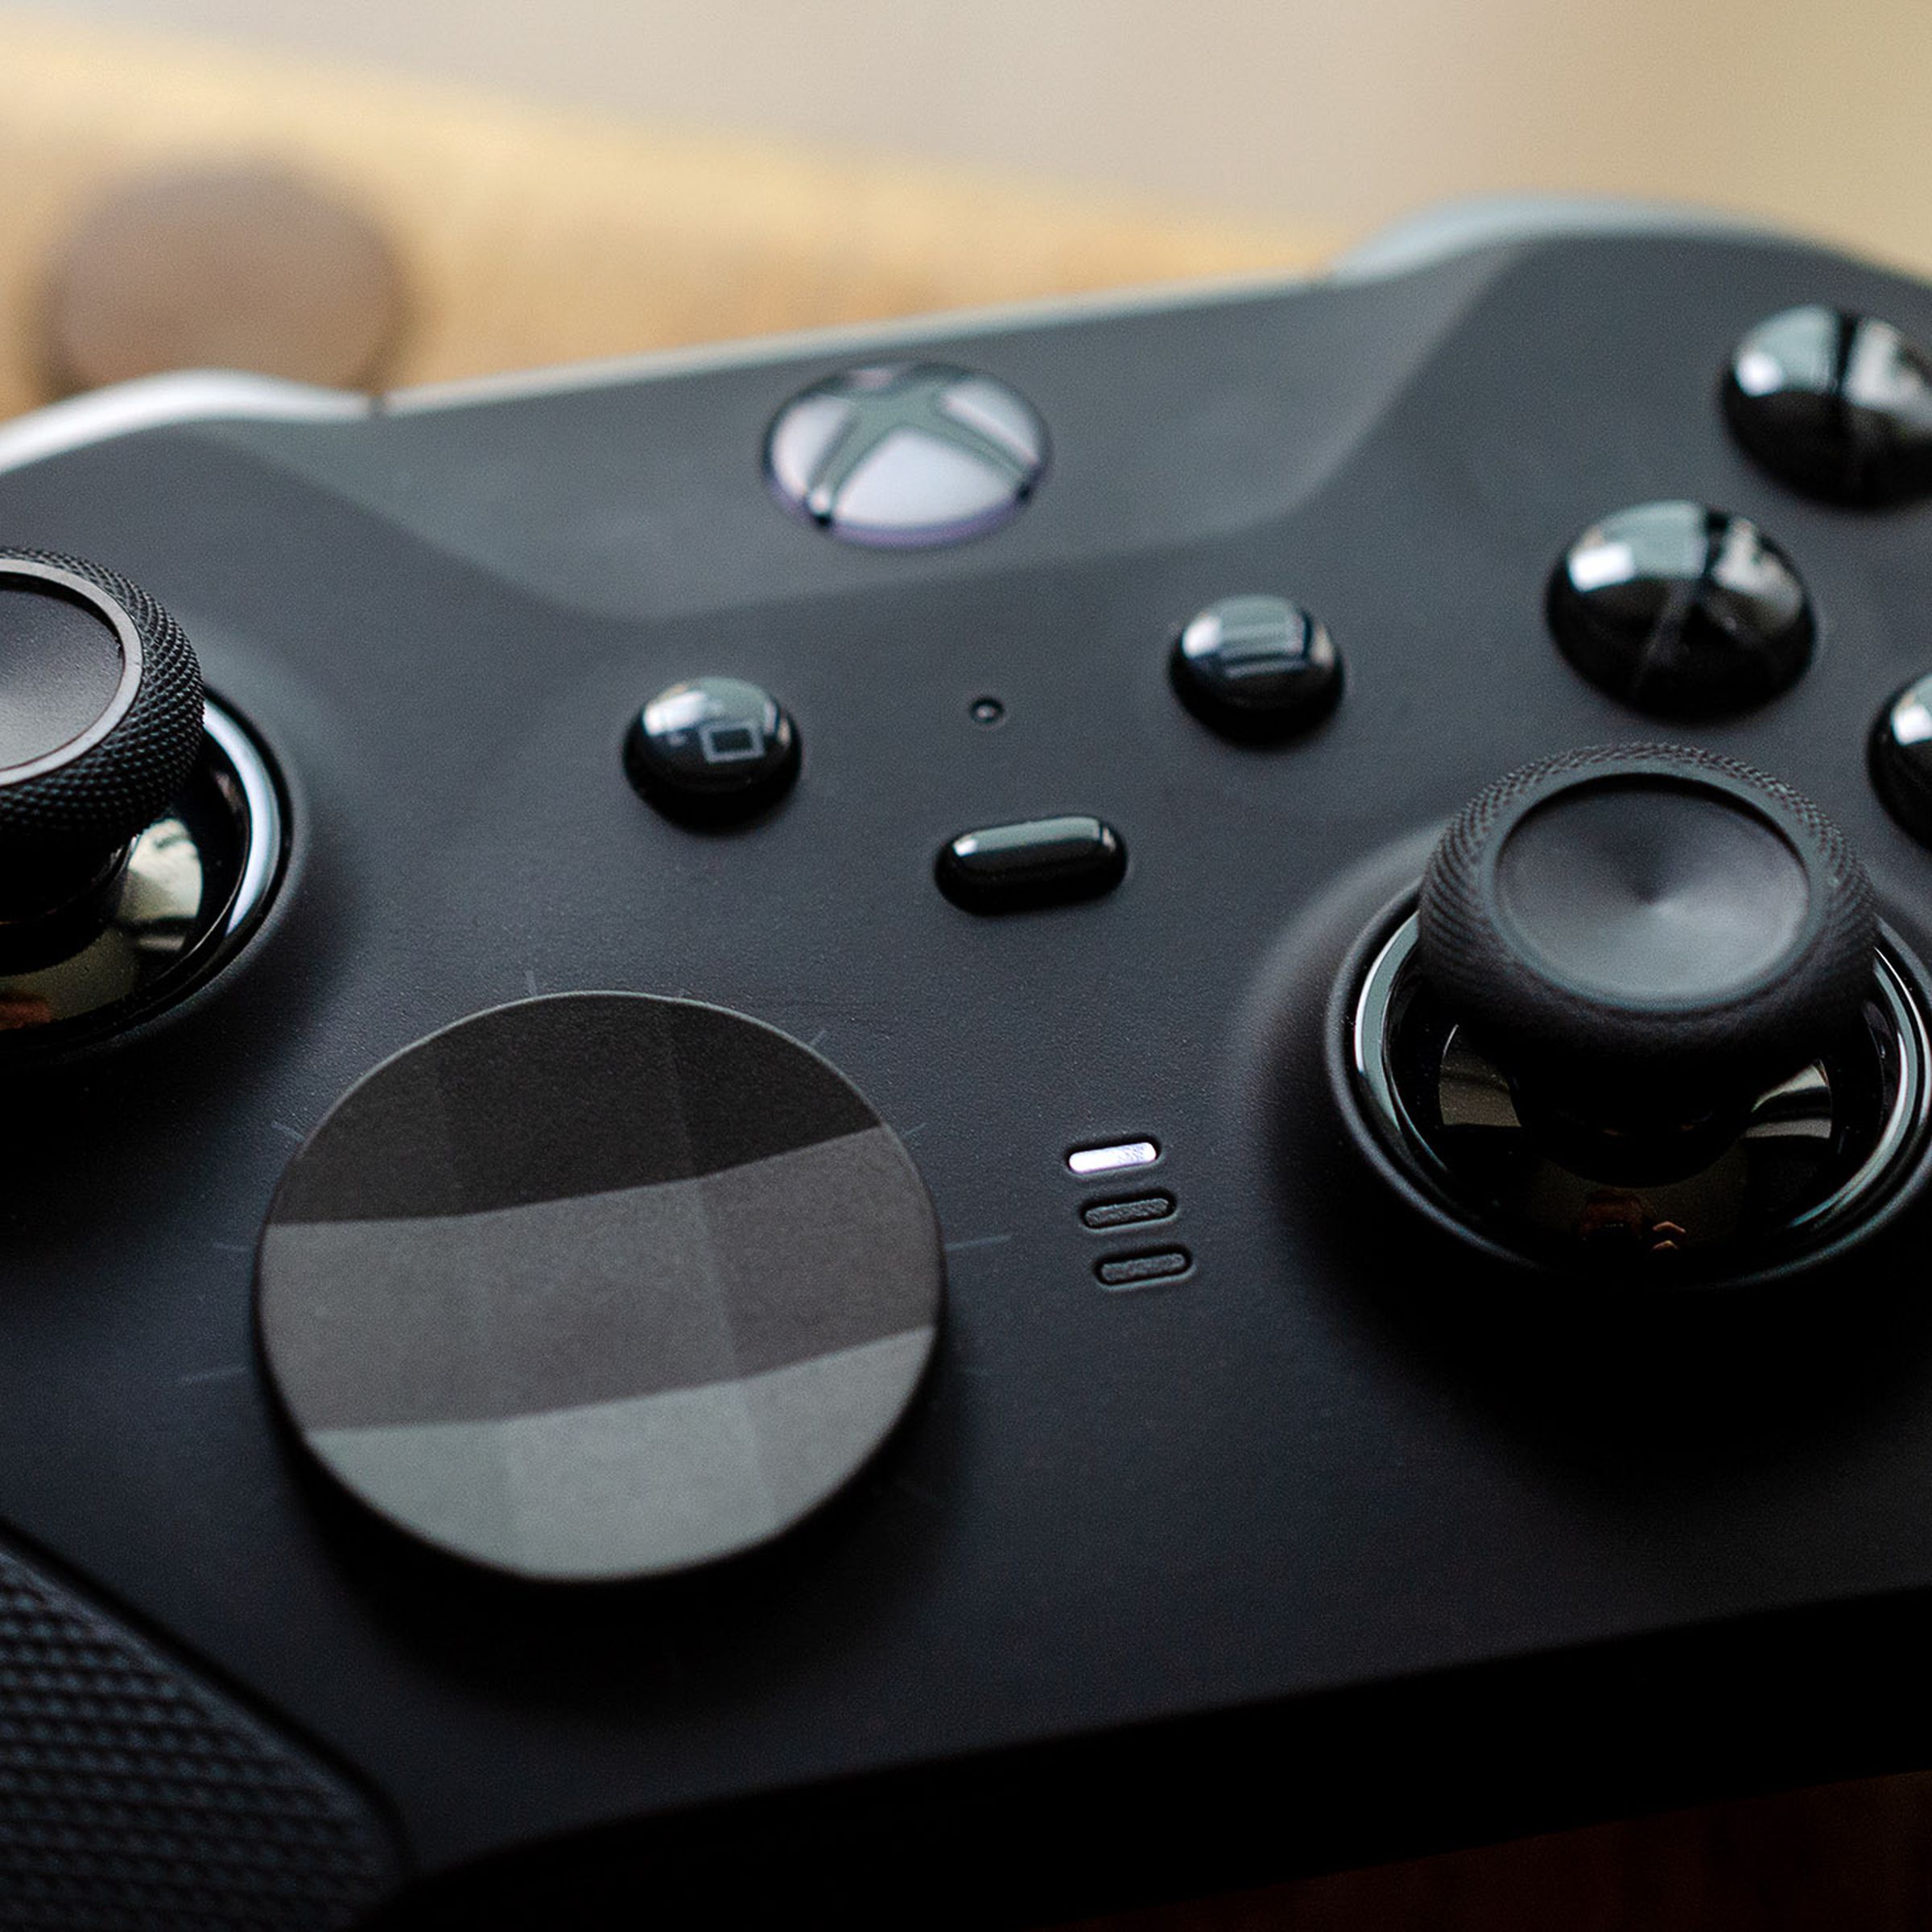 A photo showing the Elite 2 controller